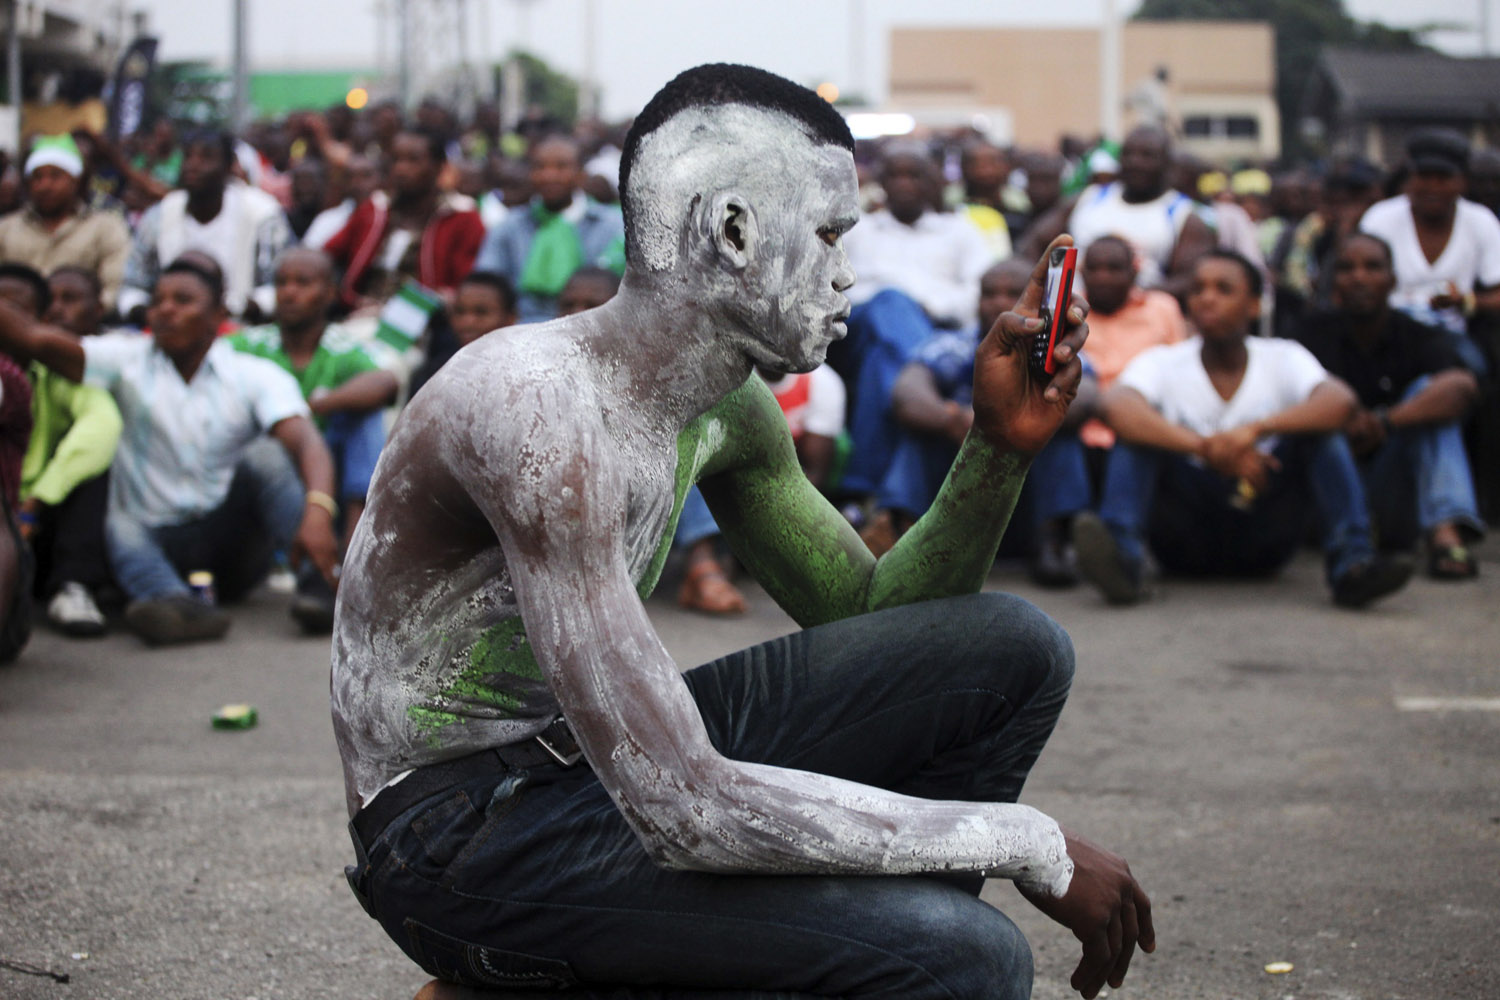 A soccer fan takes a photograph with his mobile phone at an open soccer viewing centre before the start of the Africa Cup of Nations final match between Nigeria and Burkina Faso in Lagos